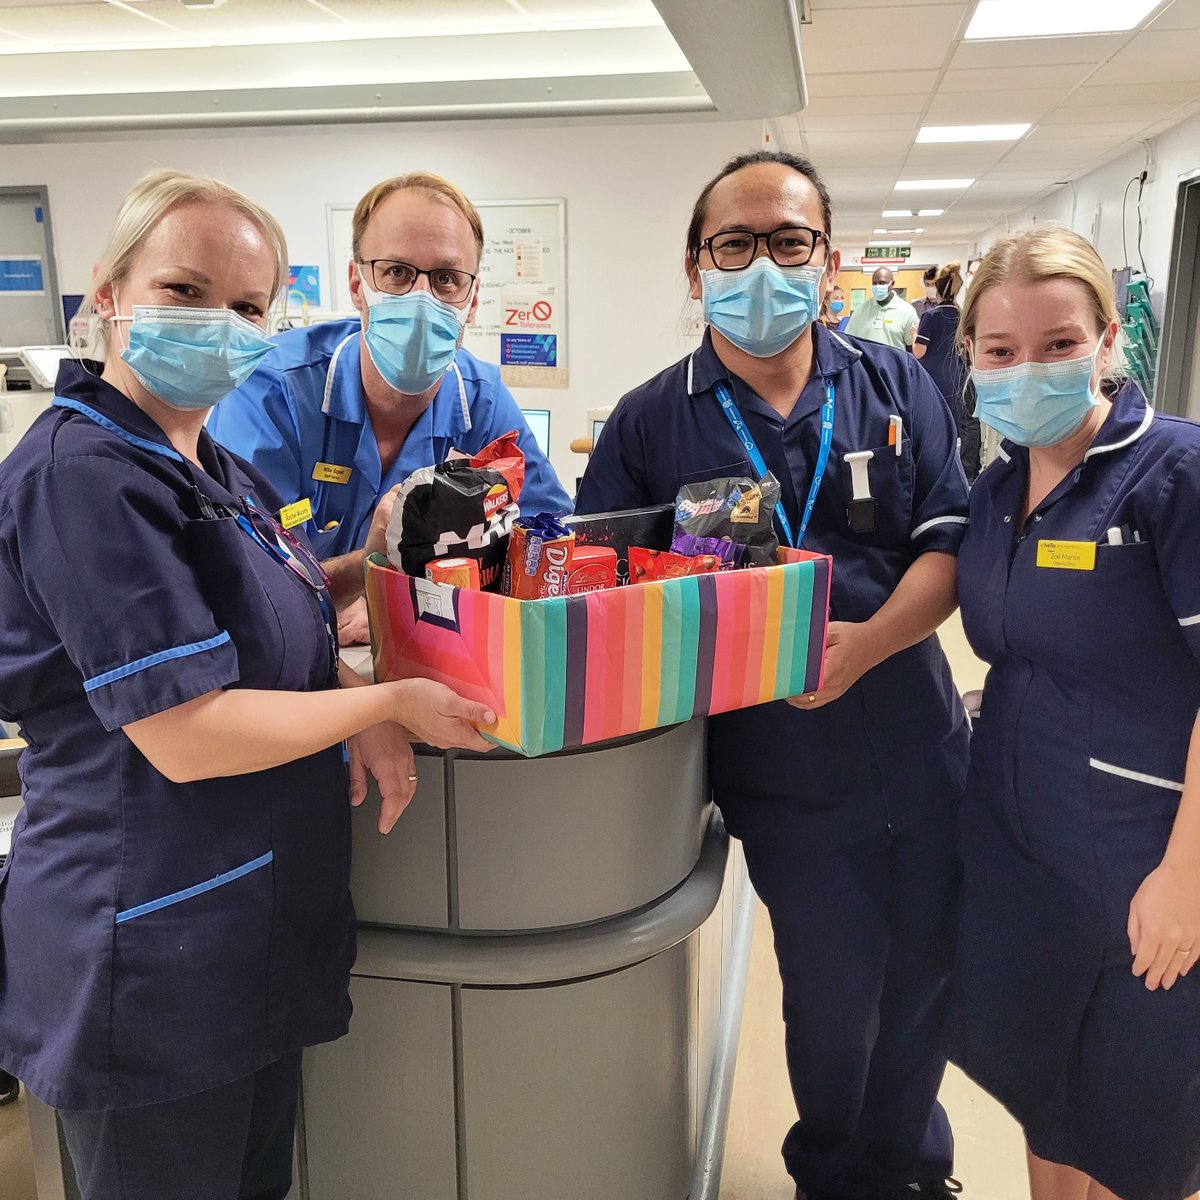 For Hypoglycaemia Awareness Week, our Diabetes Inpatient teams in York and Scarborough visited the wards to test colleagues' #hypoglycaemia knowledge 🧠 Congratulations to Ward 35 and G1, who beat the competition to win a hamper of goodies each!